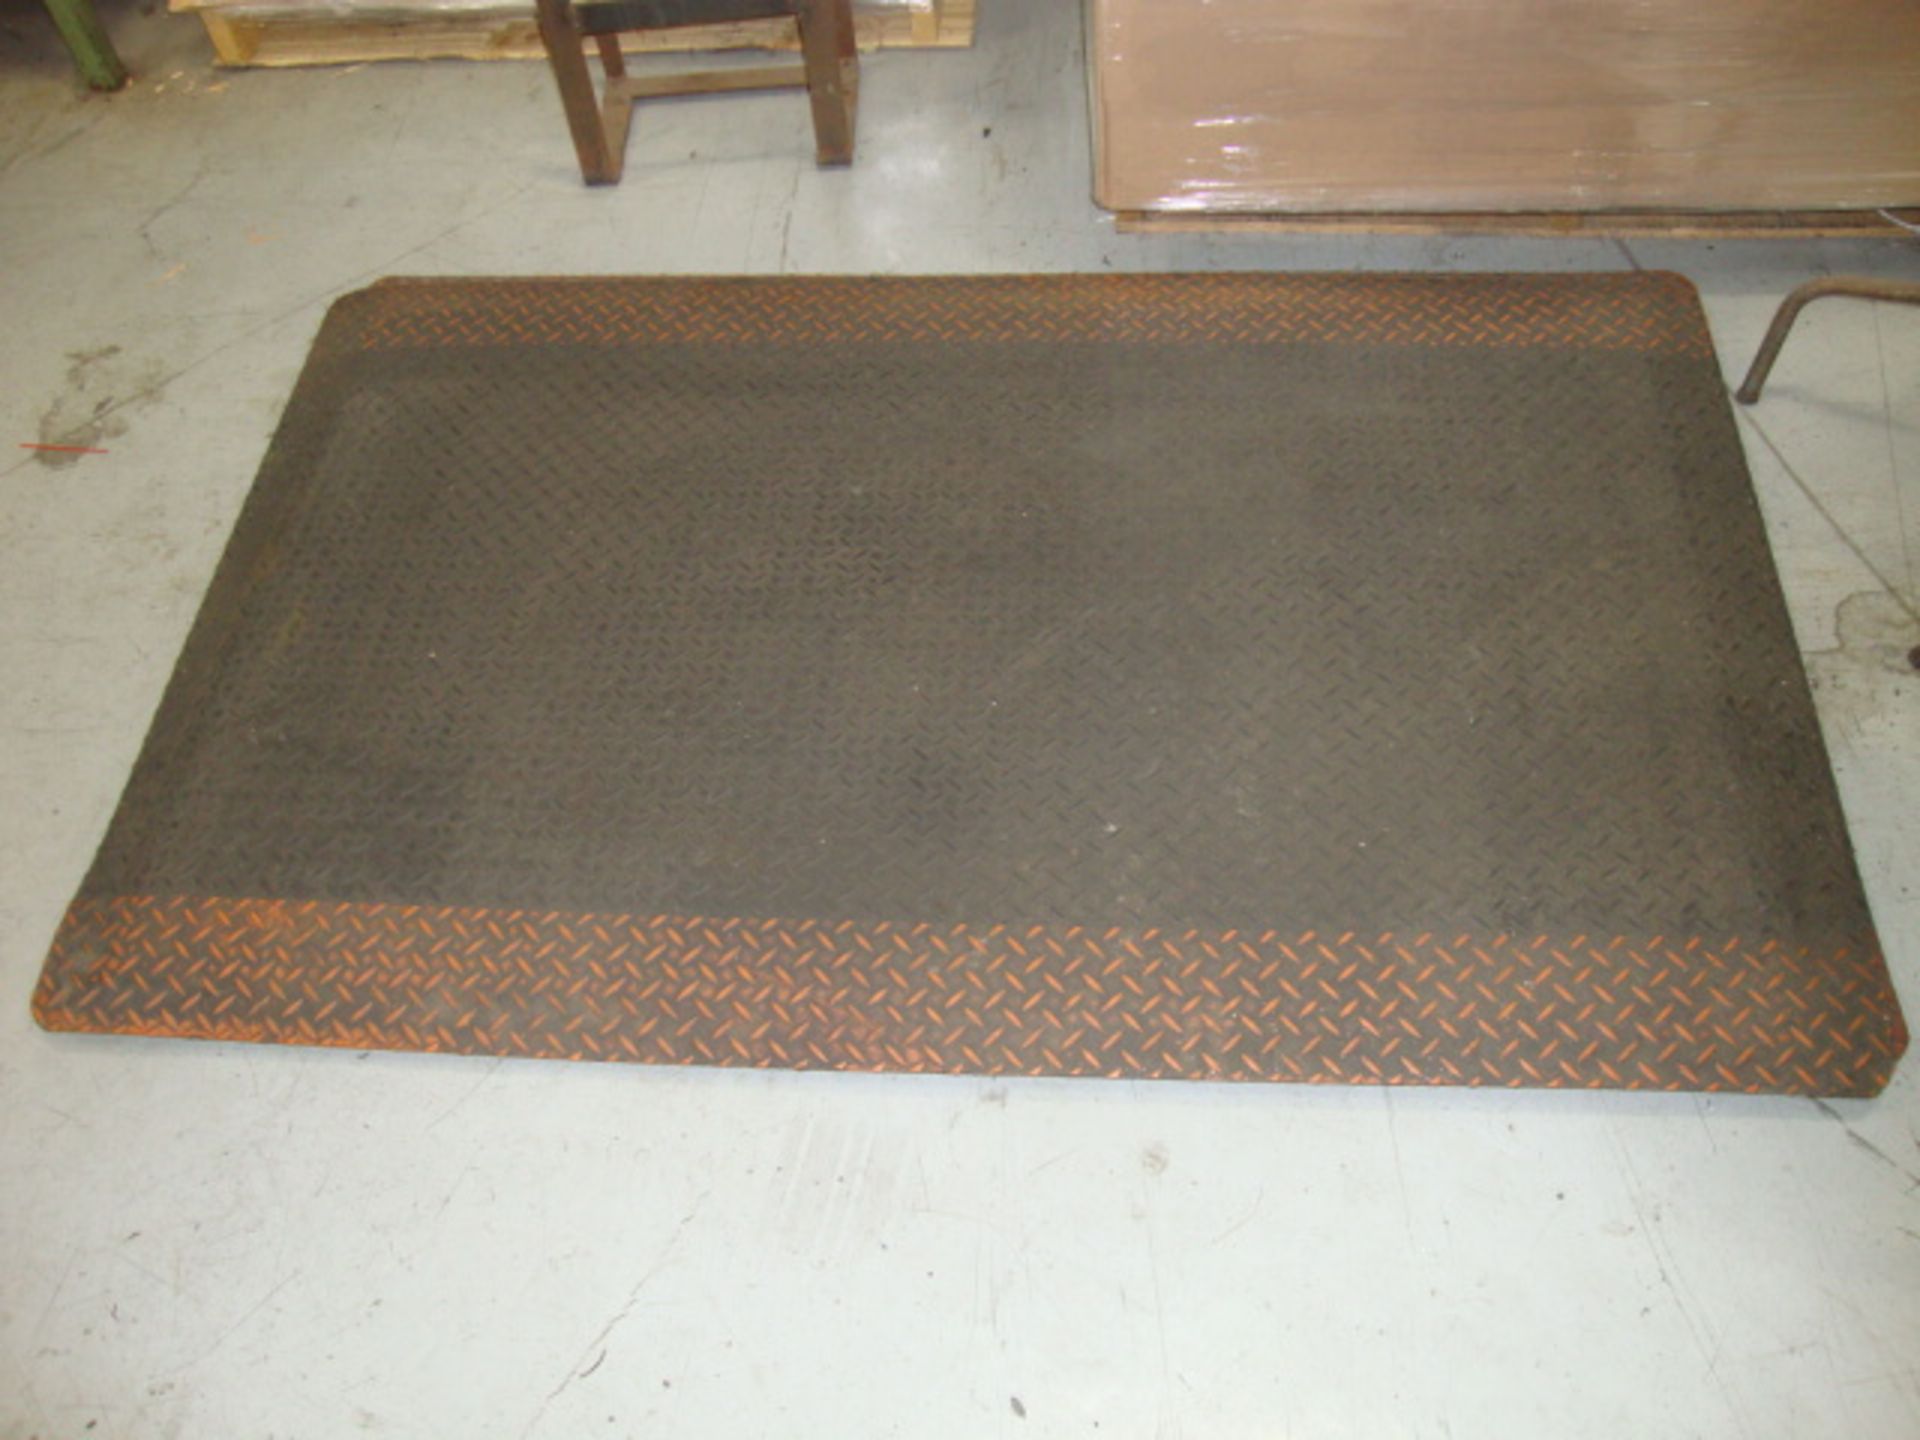 Anti-Fatigue and Oil Resistant Mat, approx. 60" x 36"